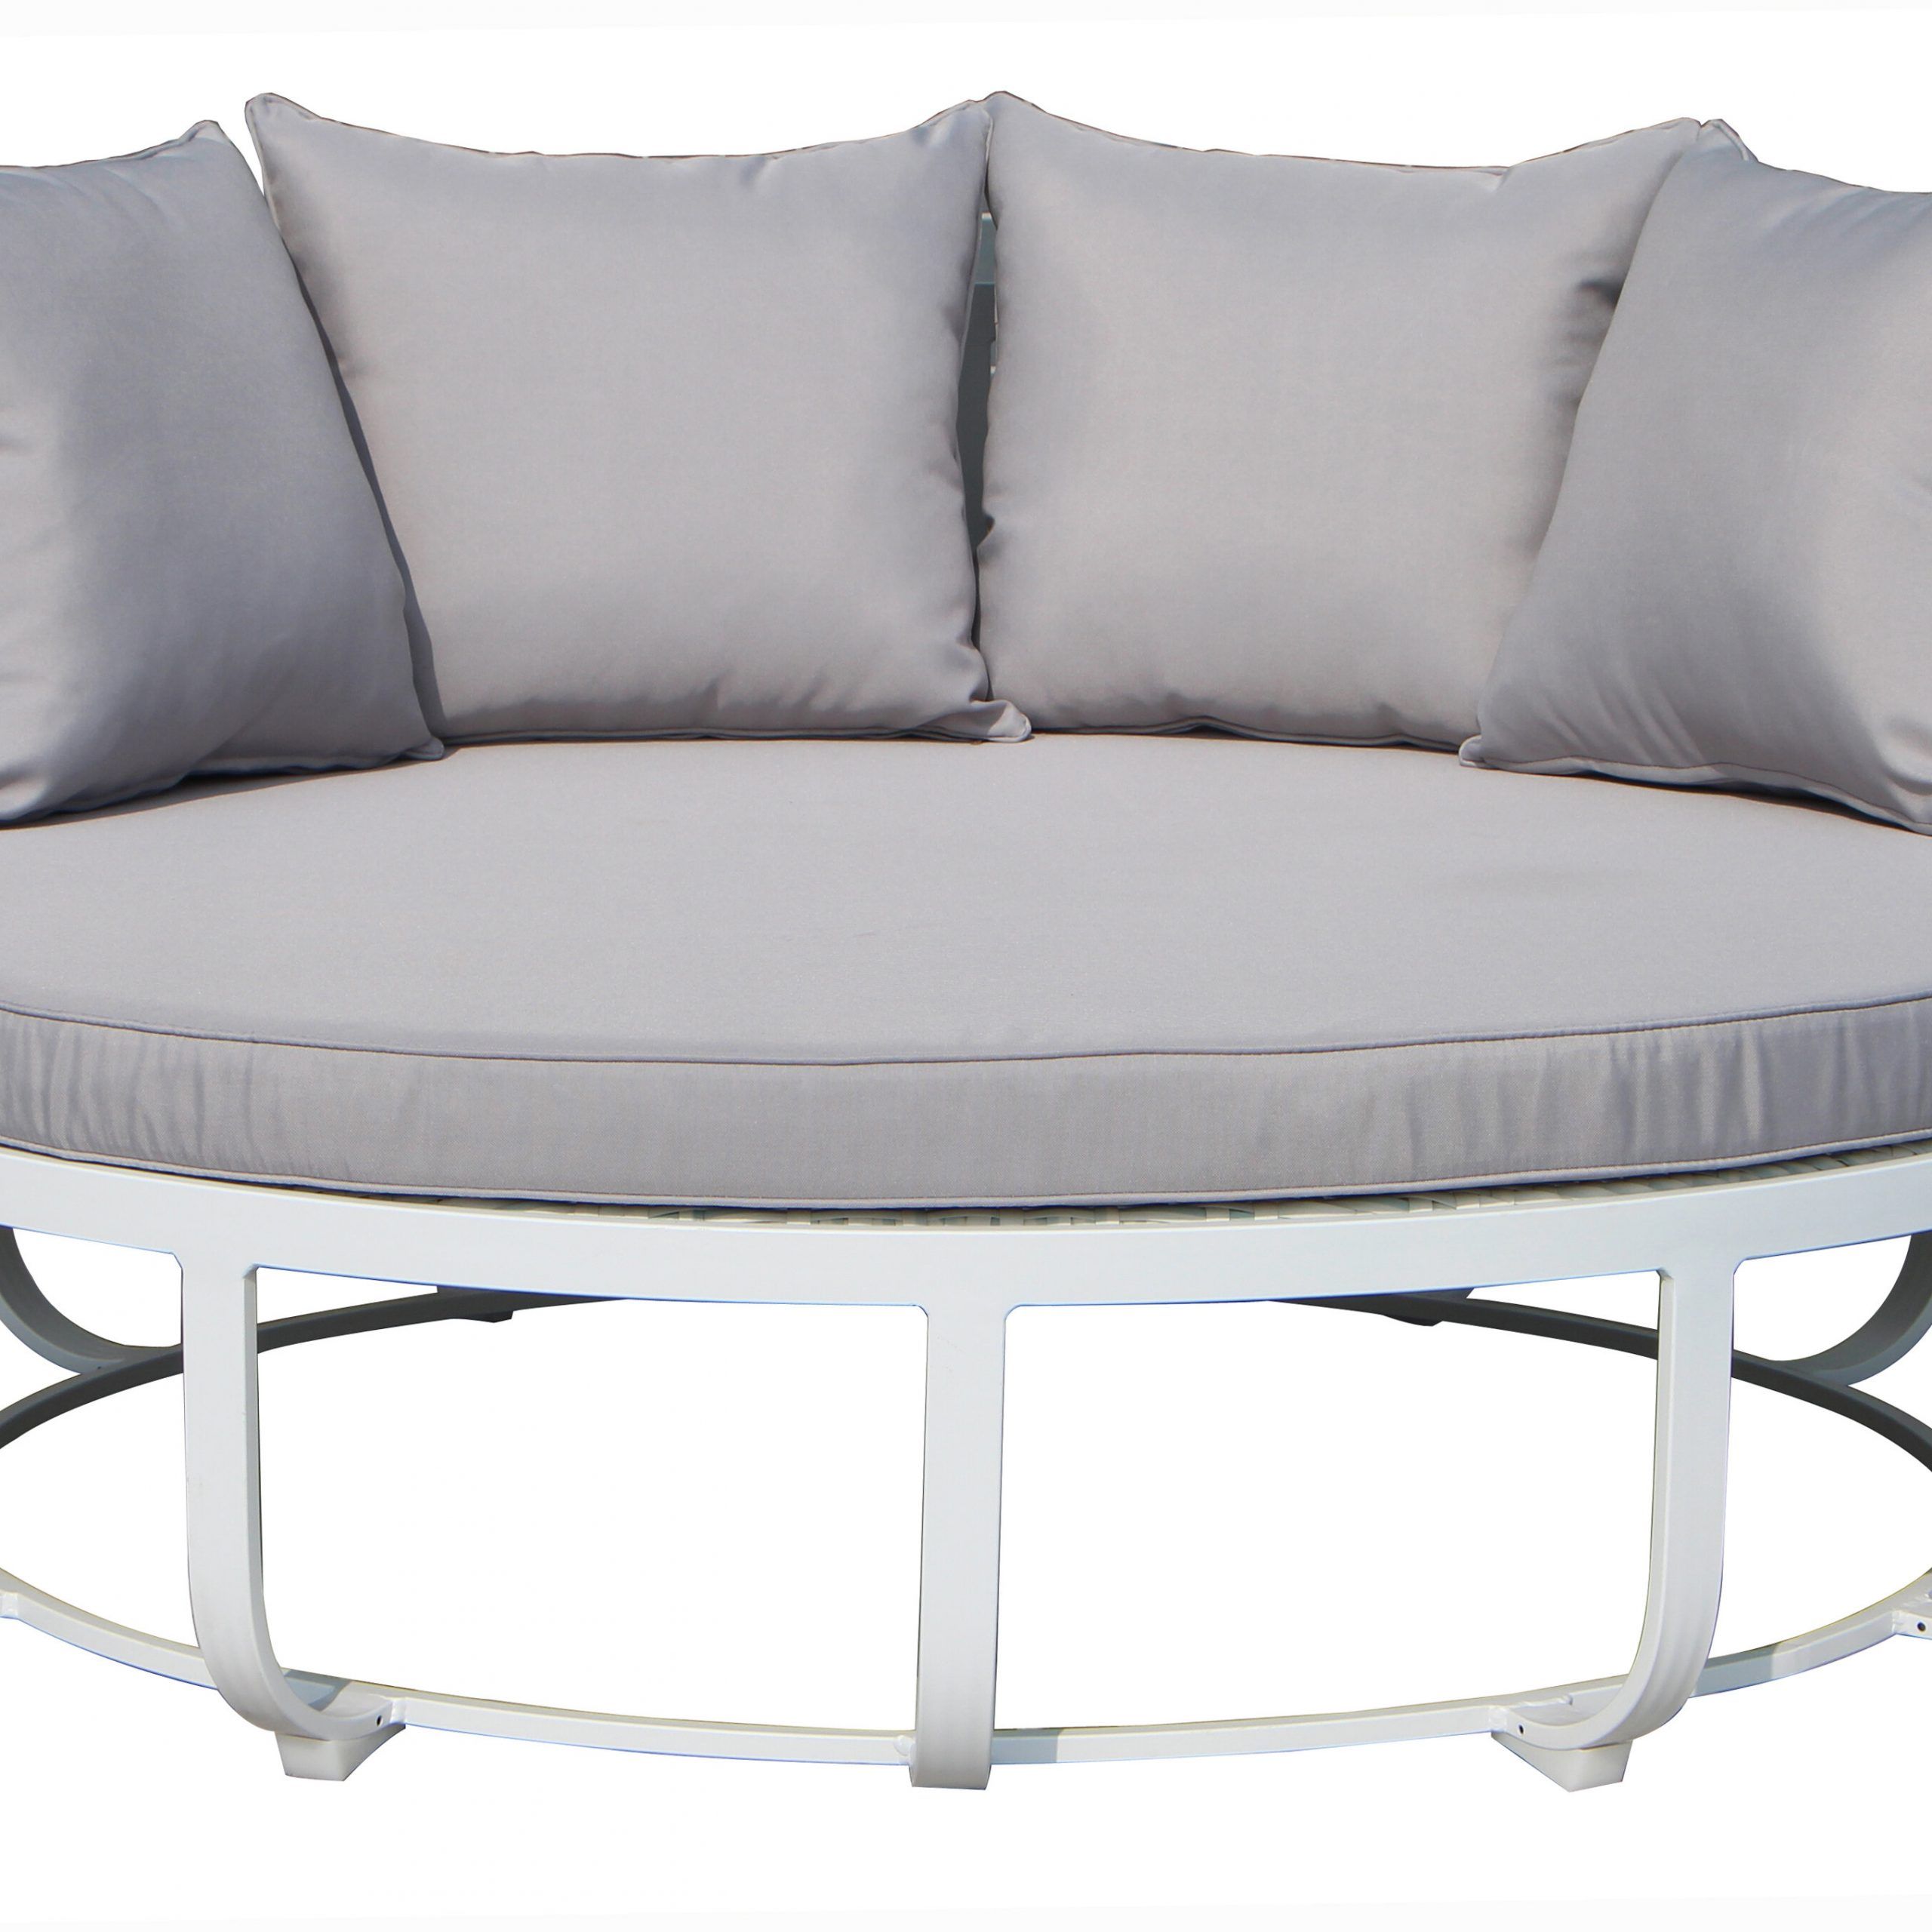 Tallmadge Day Bed With Cushions Throughout Trendy Bishop Daybeds (View 17 of 25)